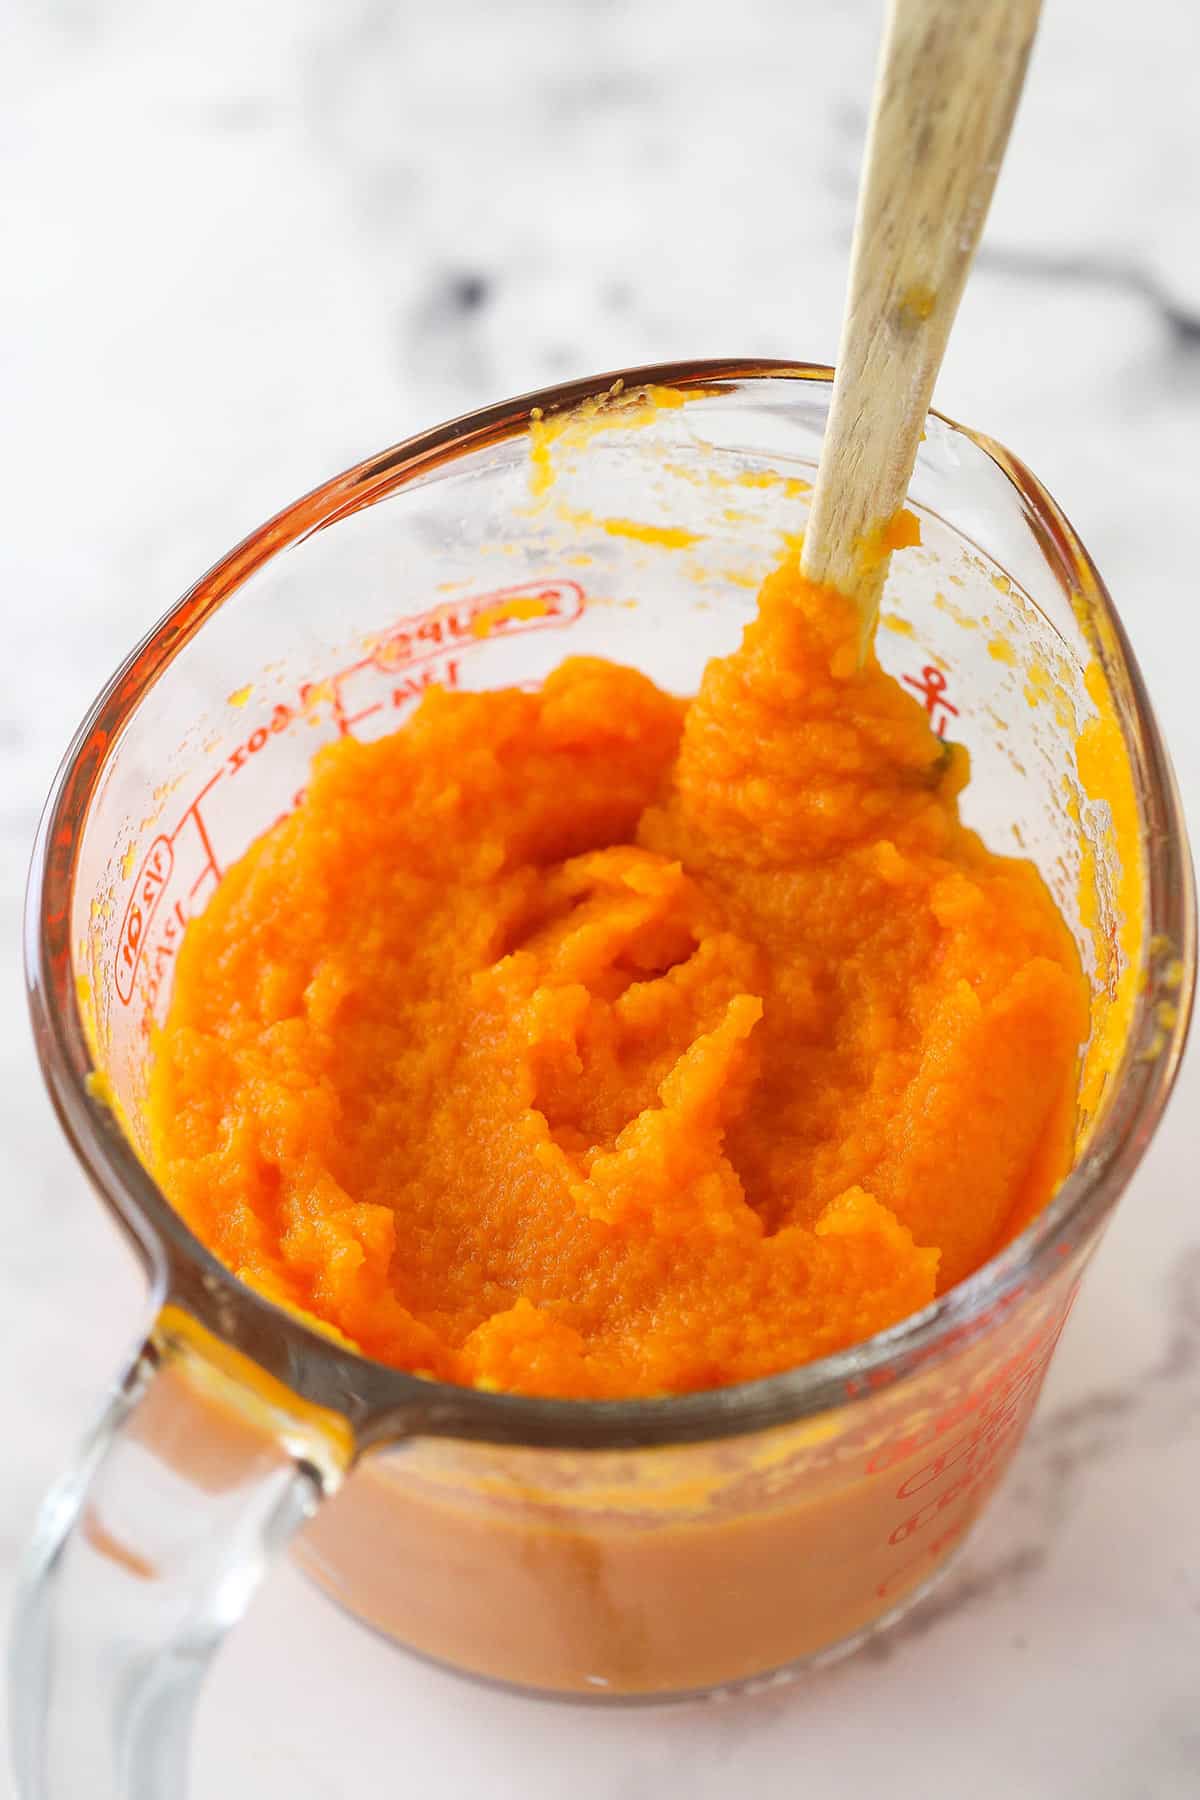 Carrot puree in a measuring cup.